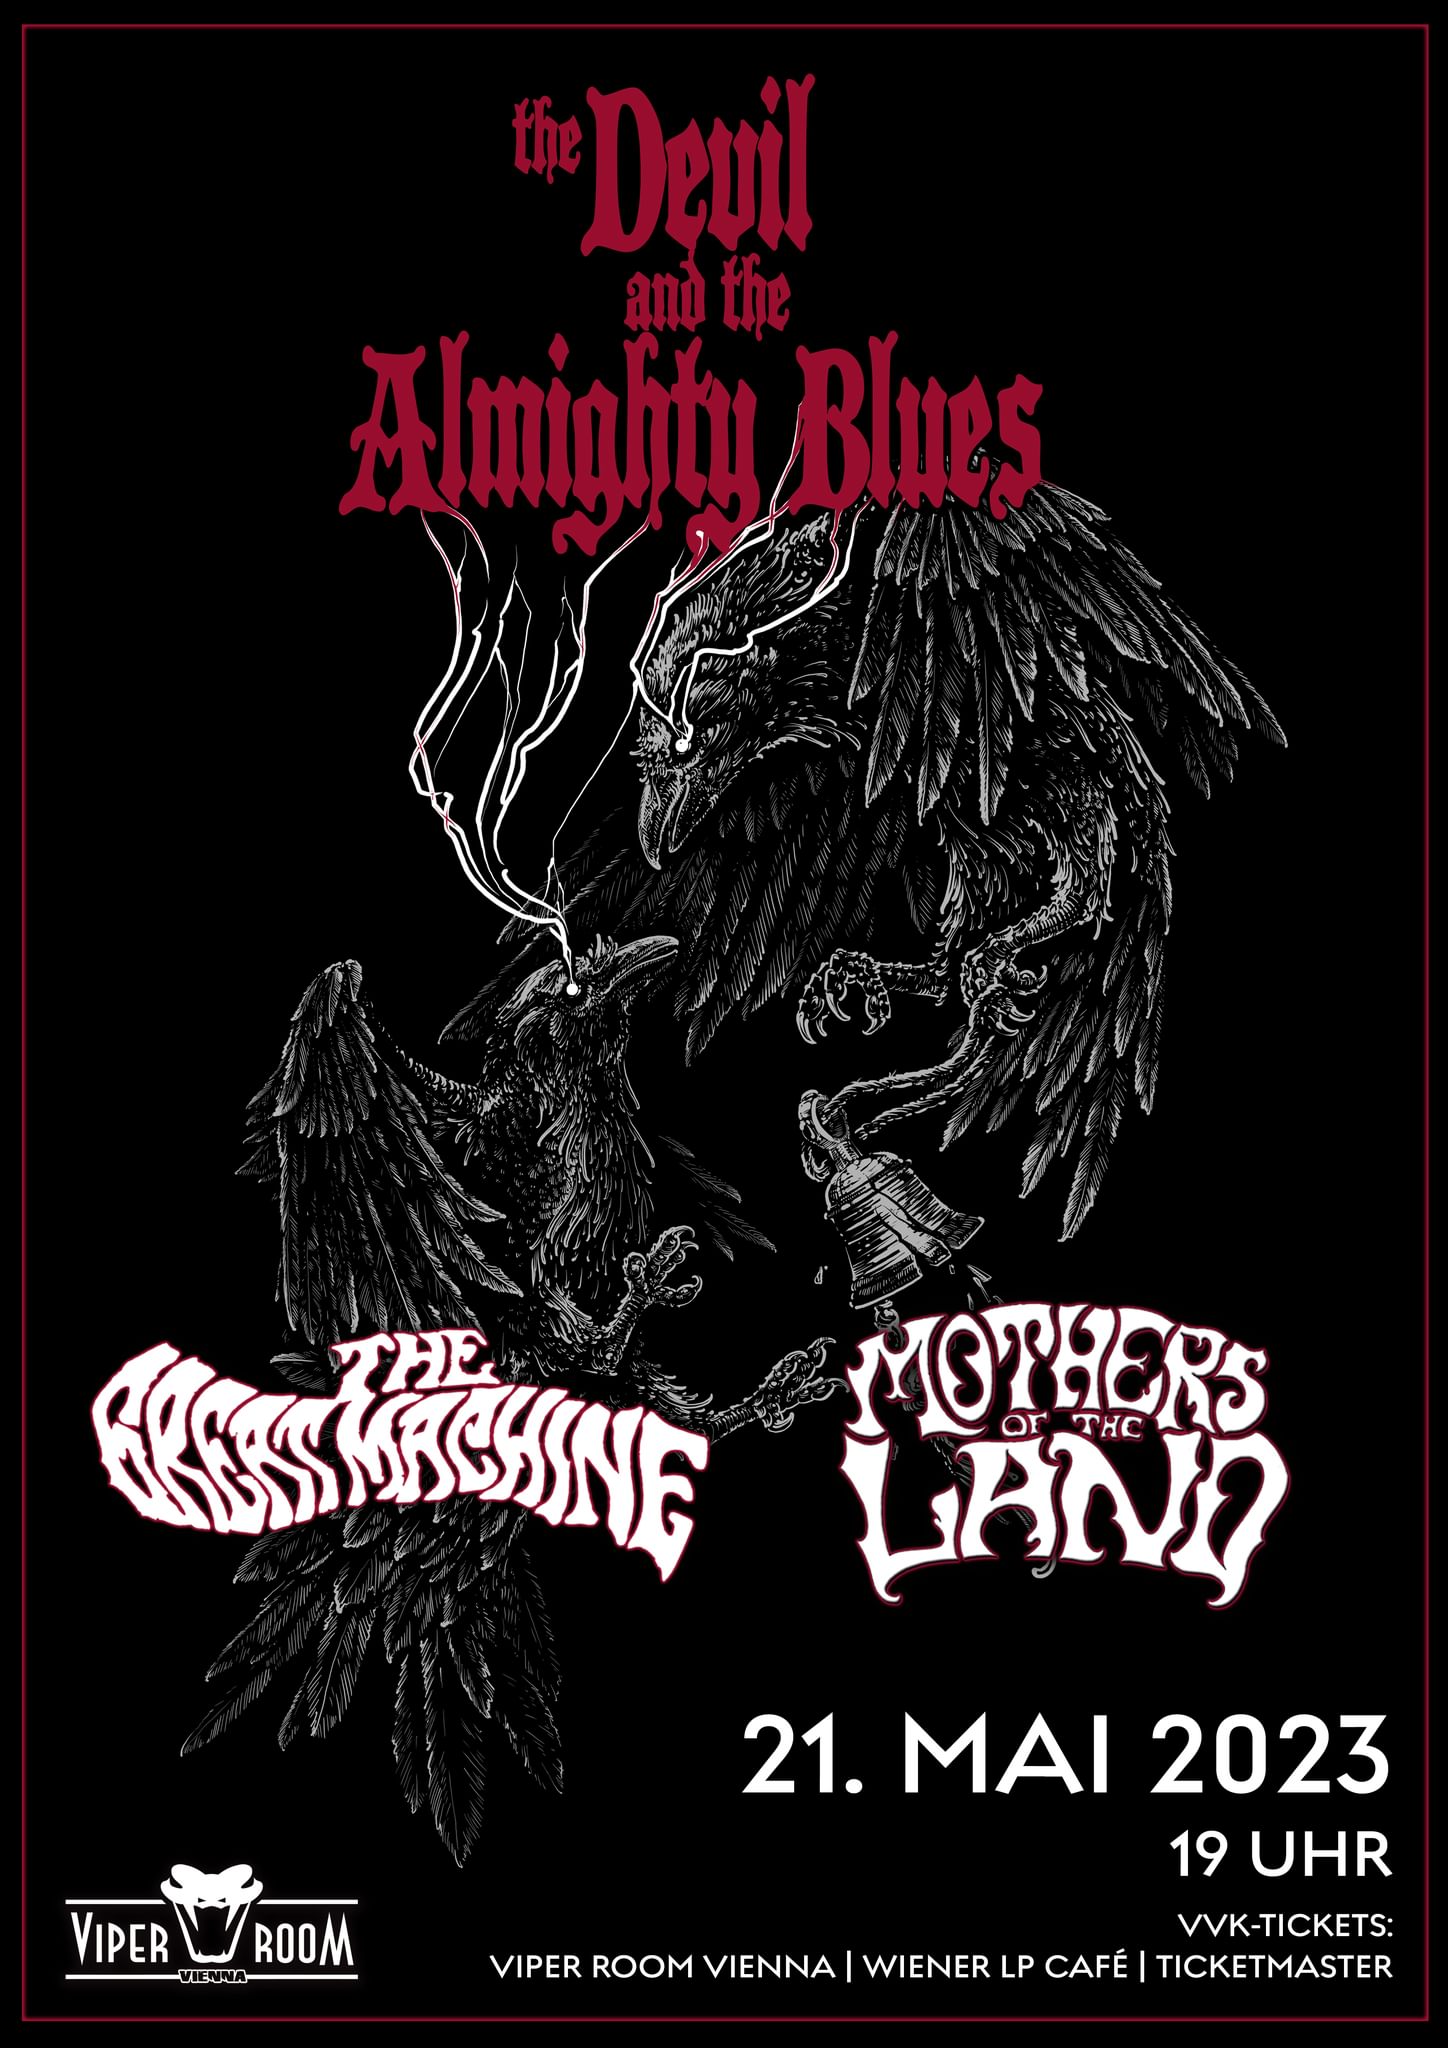 THE DEVIL AND THE ALMIGHTY BLUES / THE GREAT MACHINE / MOTHERS OF THE LAND am 21. May 2023 @ Viper Room.